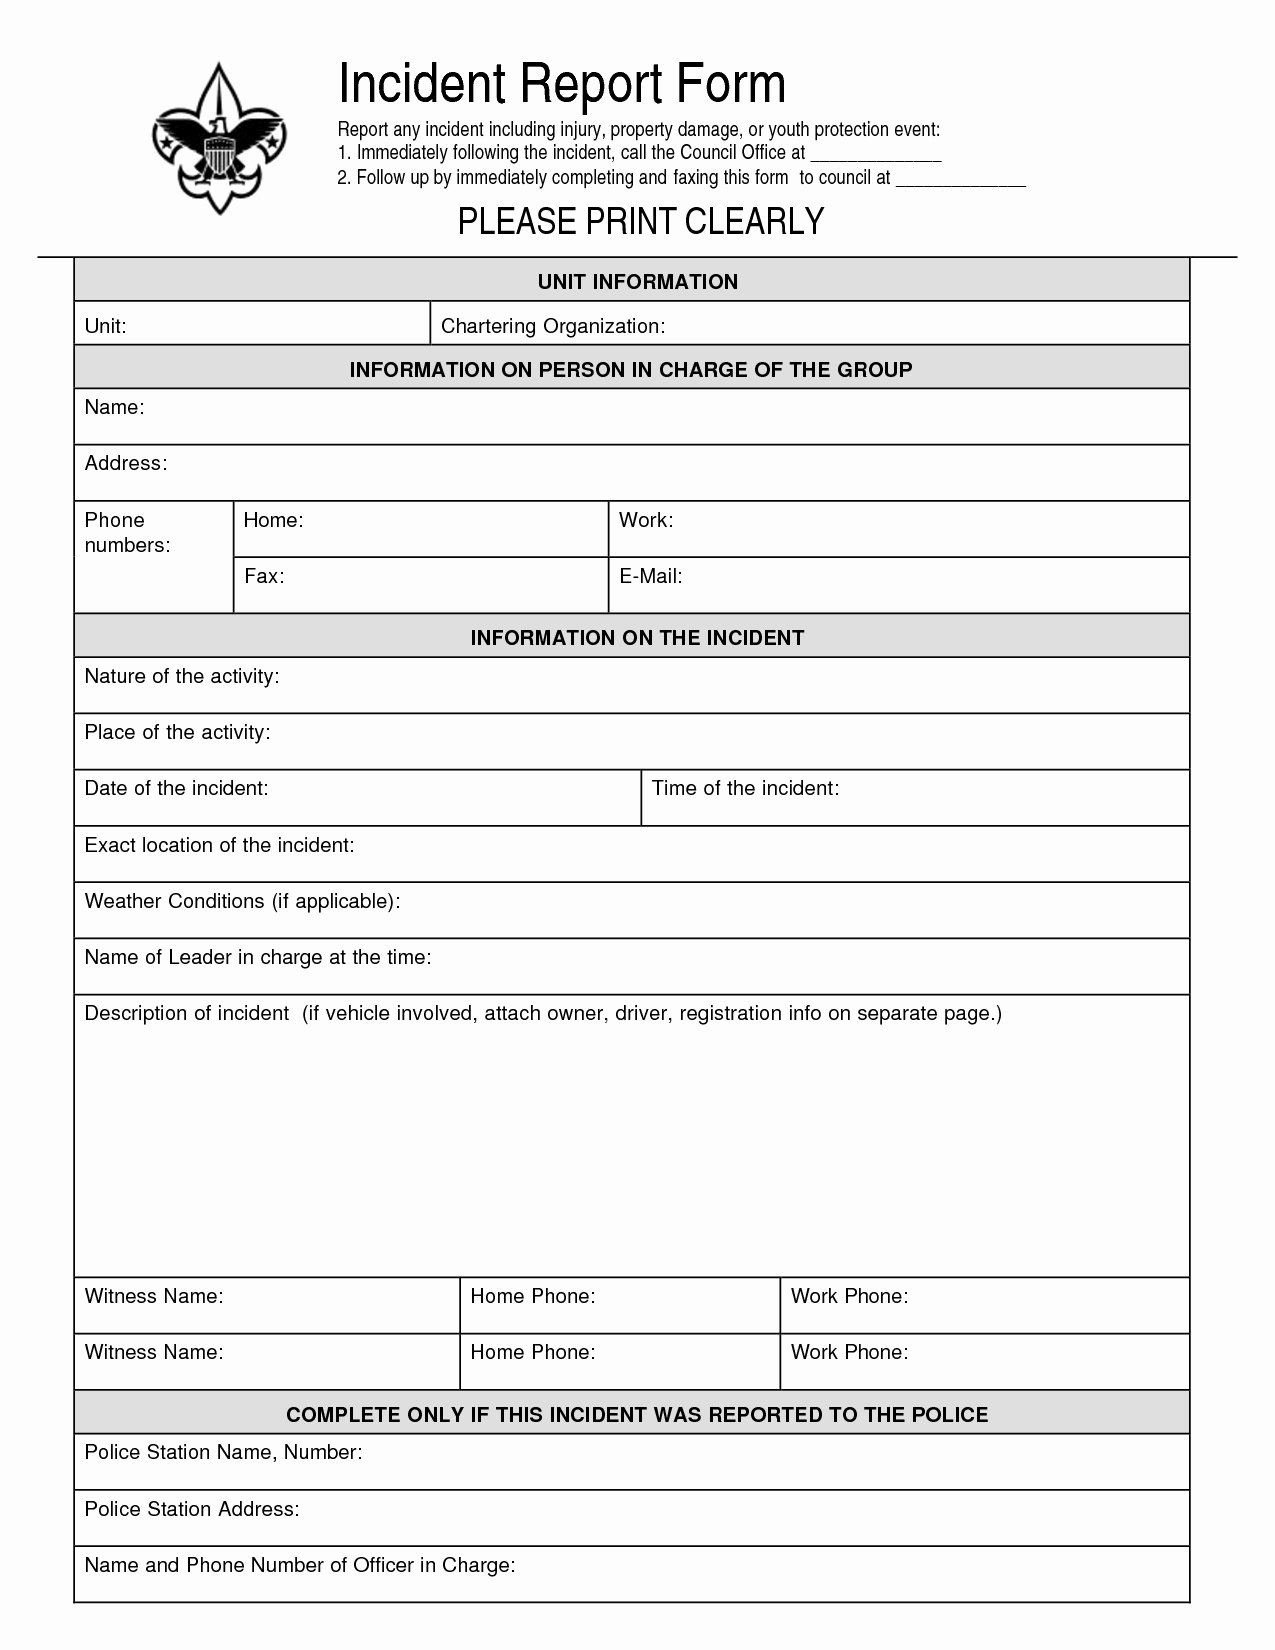 Blank Incident Report form Lovely Best S Of Free Police Incident forms Printable